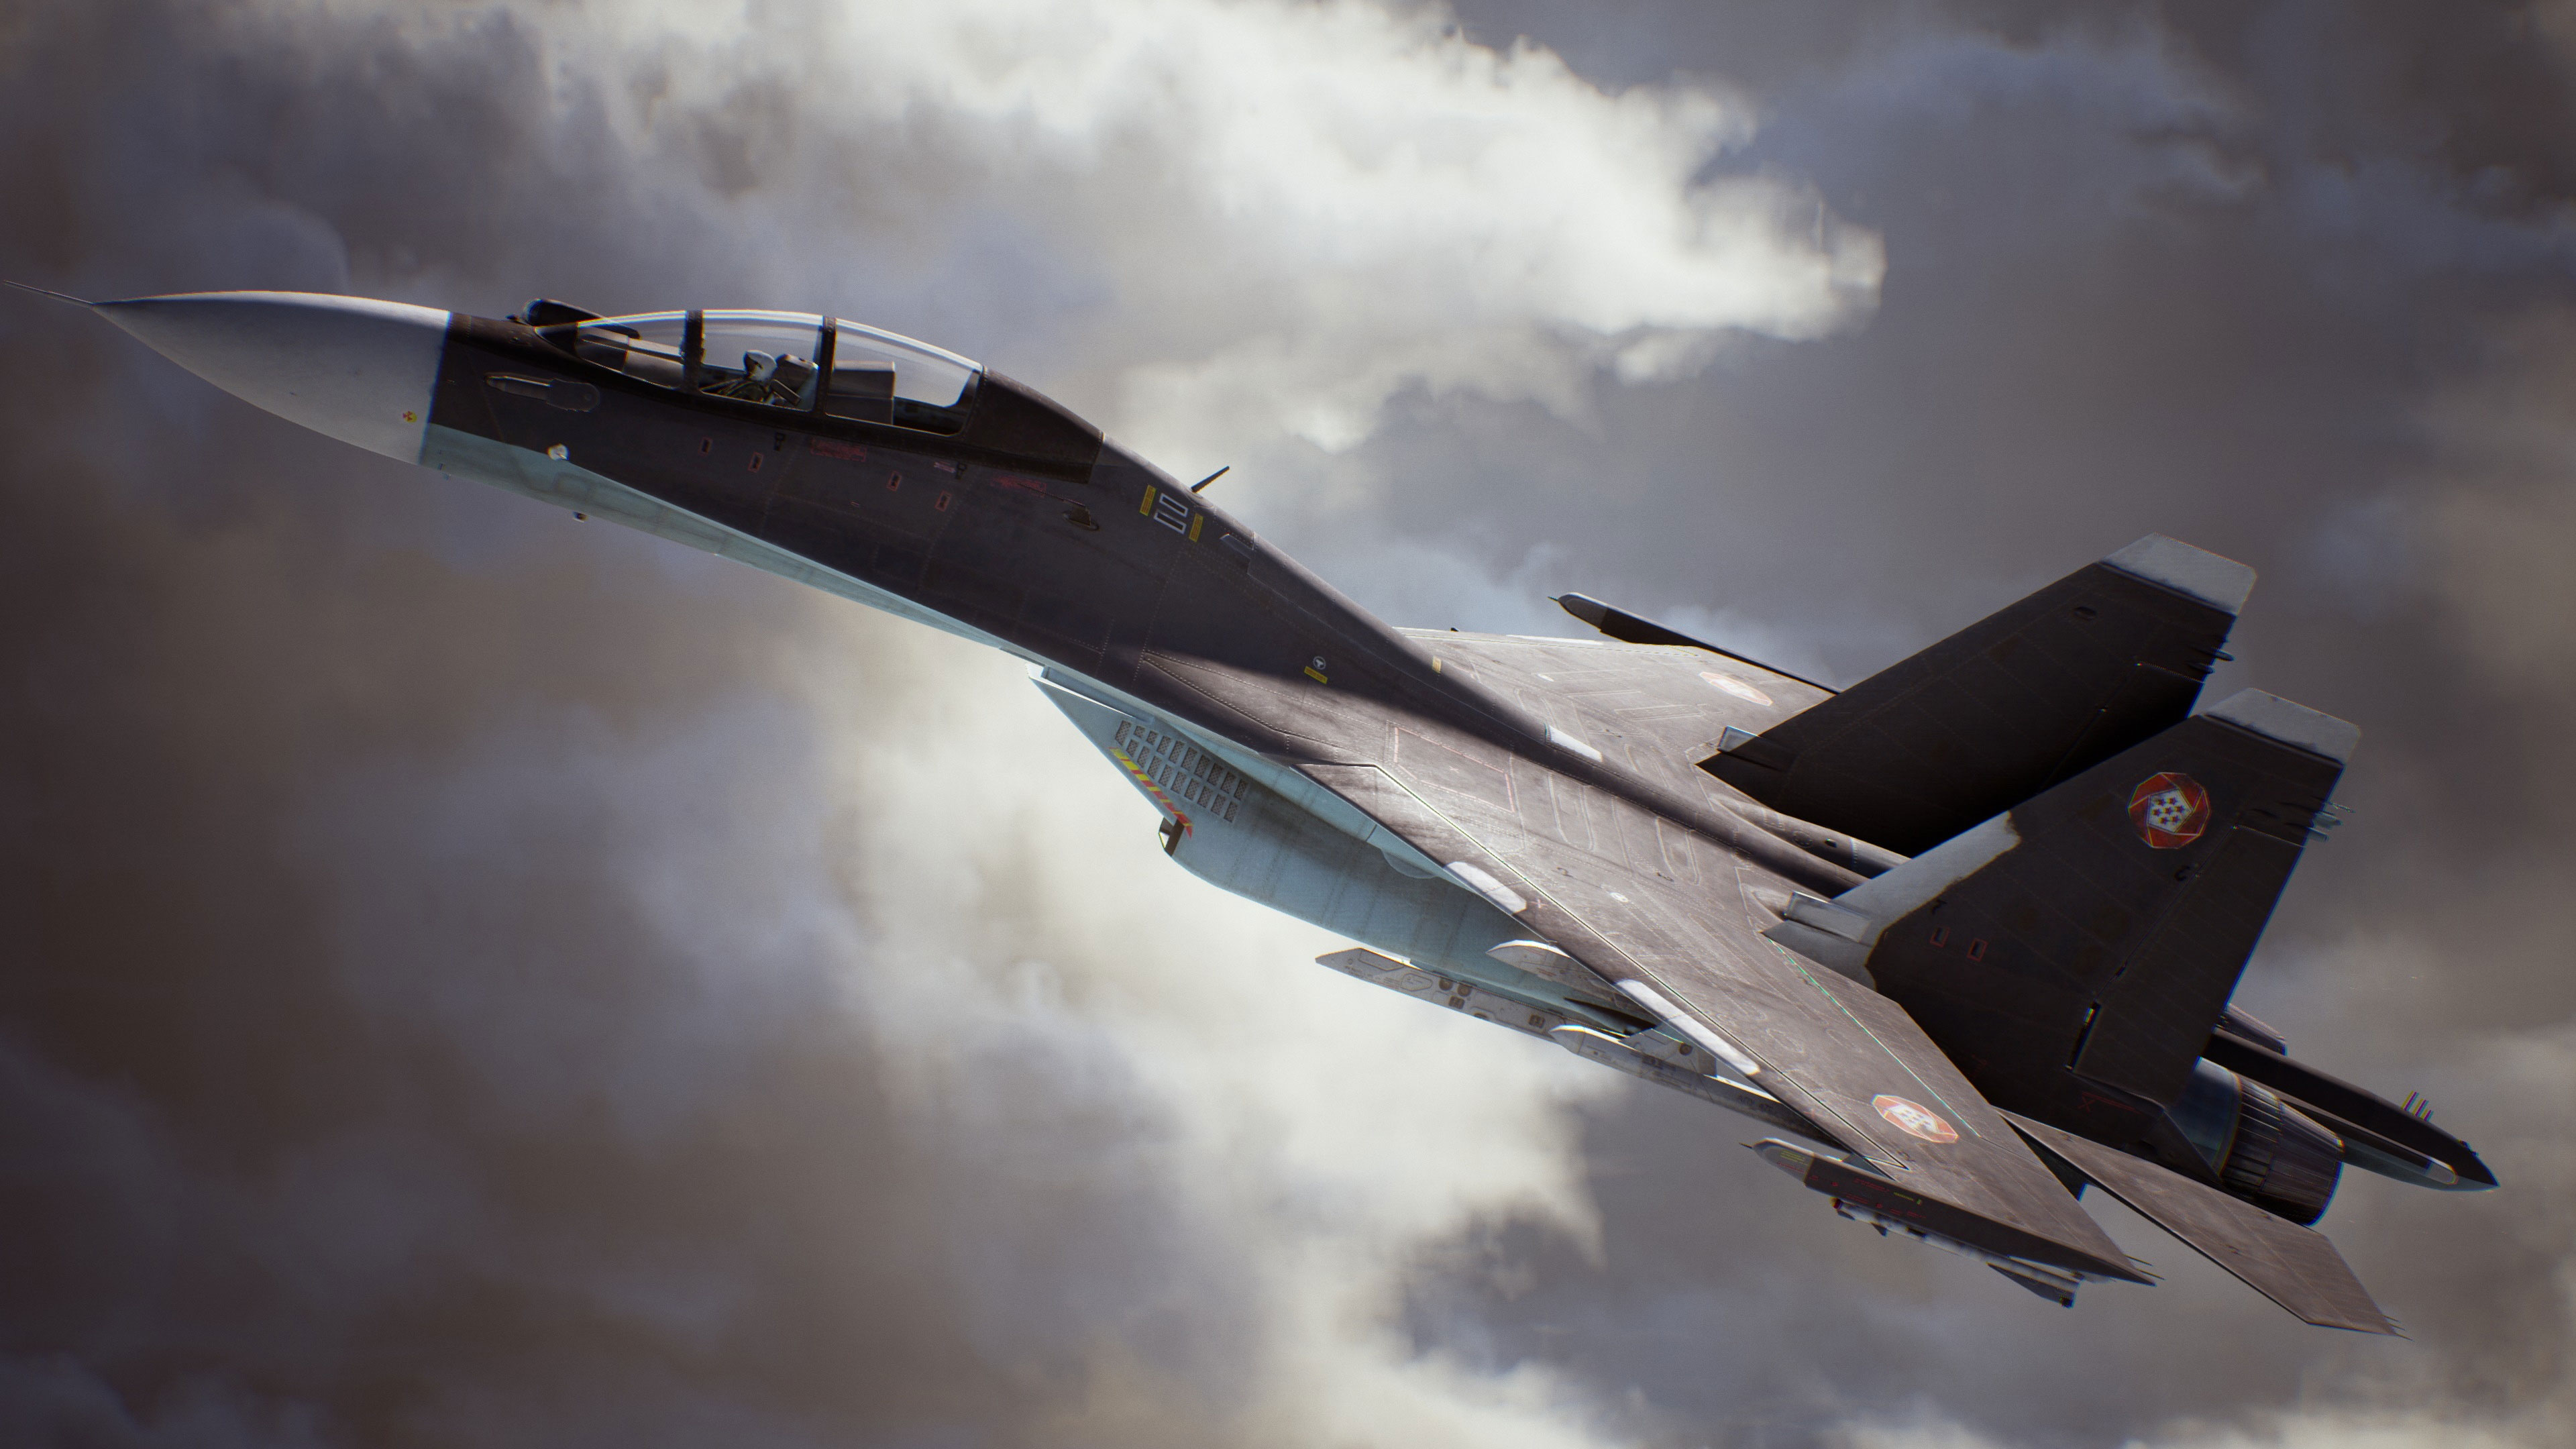 ace combat 7 skies unknown wallpapers in ultra hd 4k gameranx ace combat 7 skies unknown wallpapers